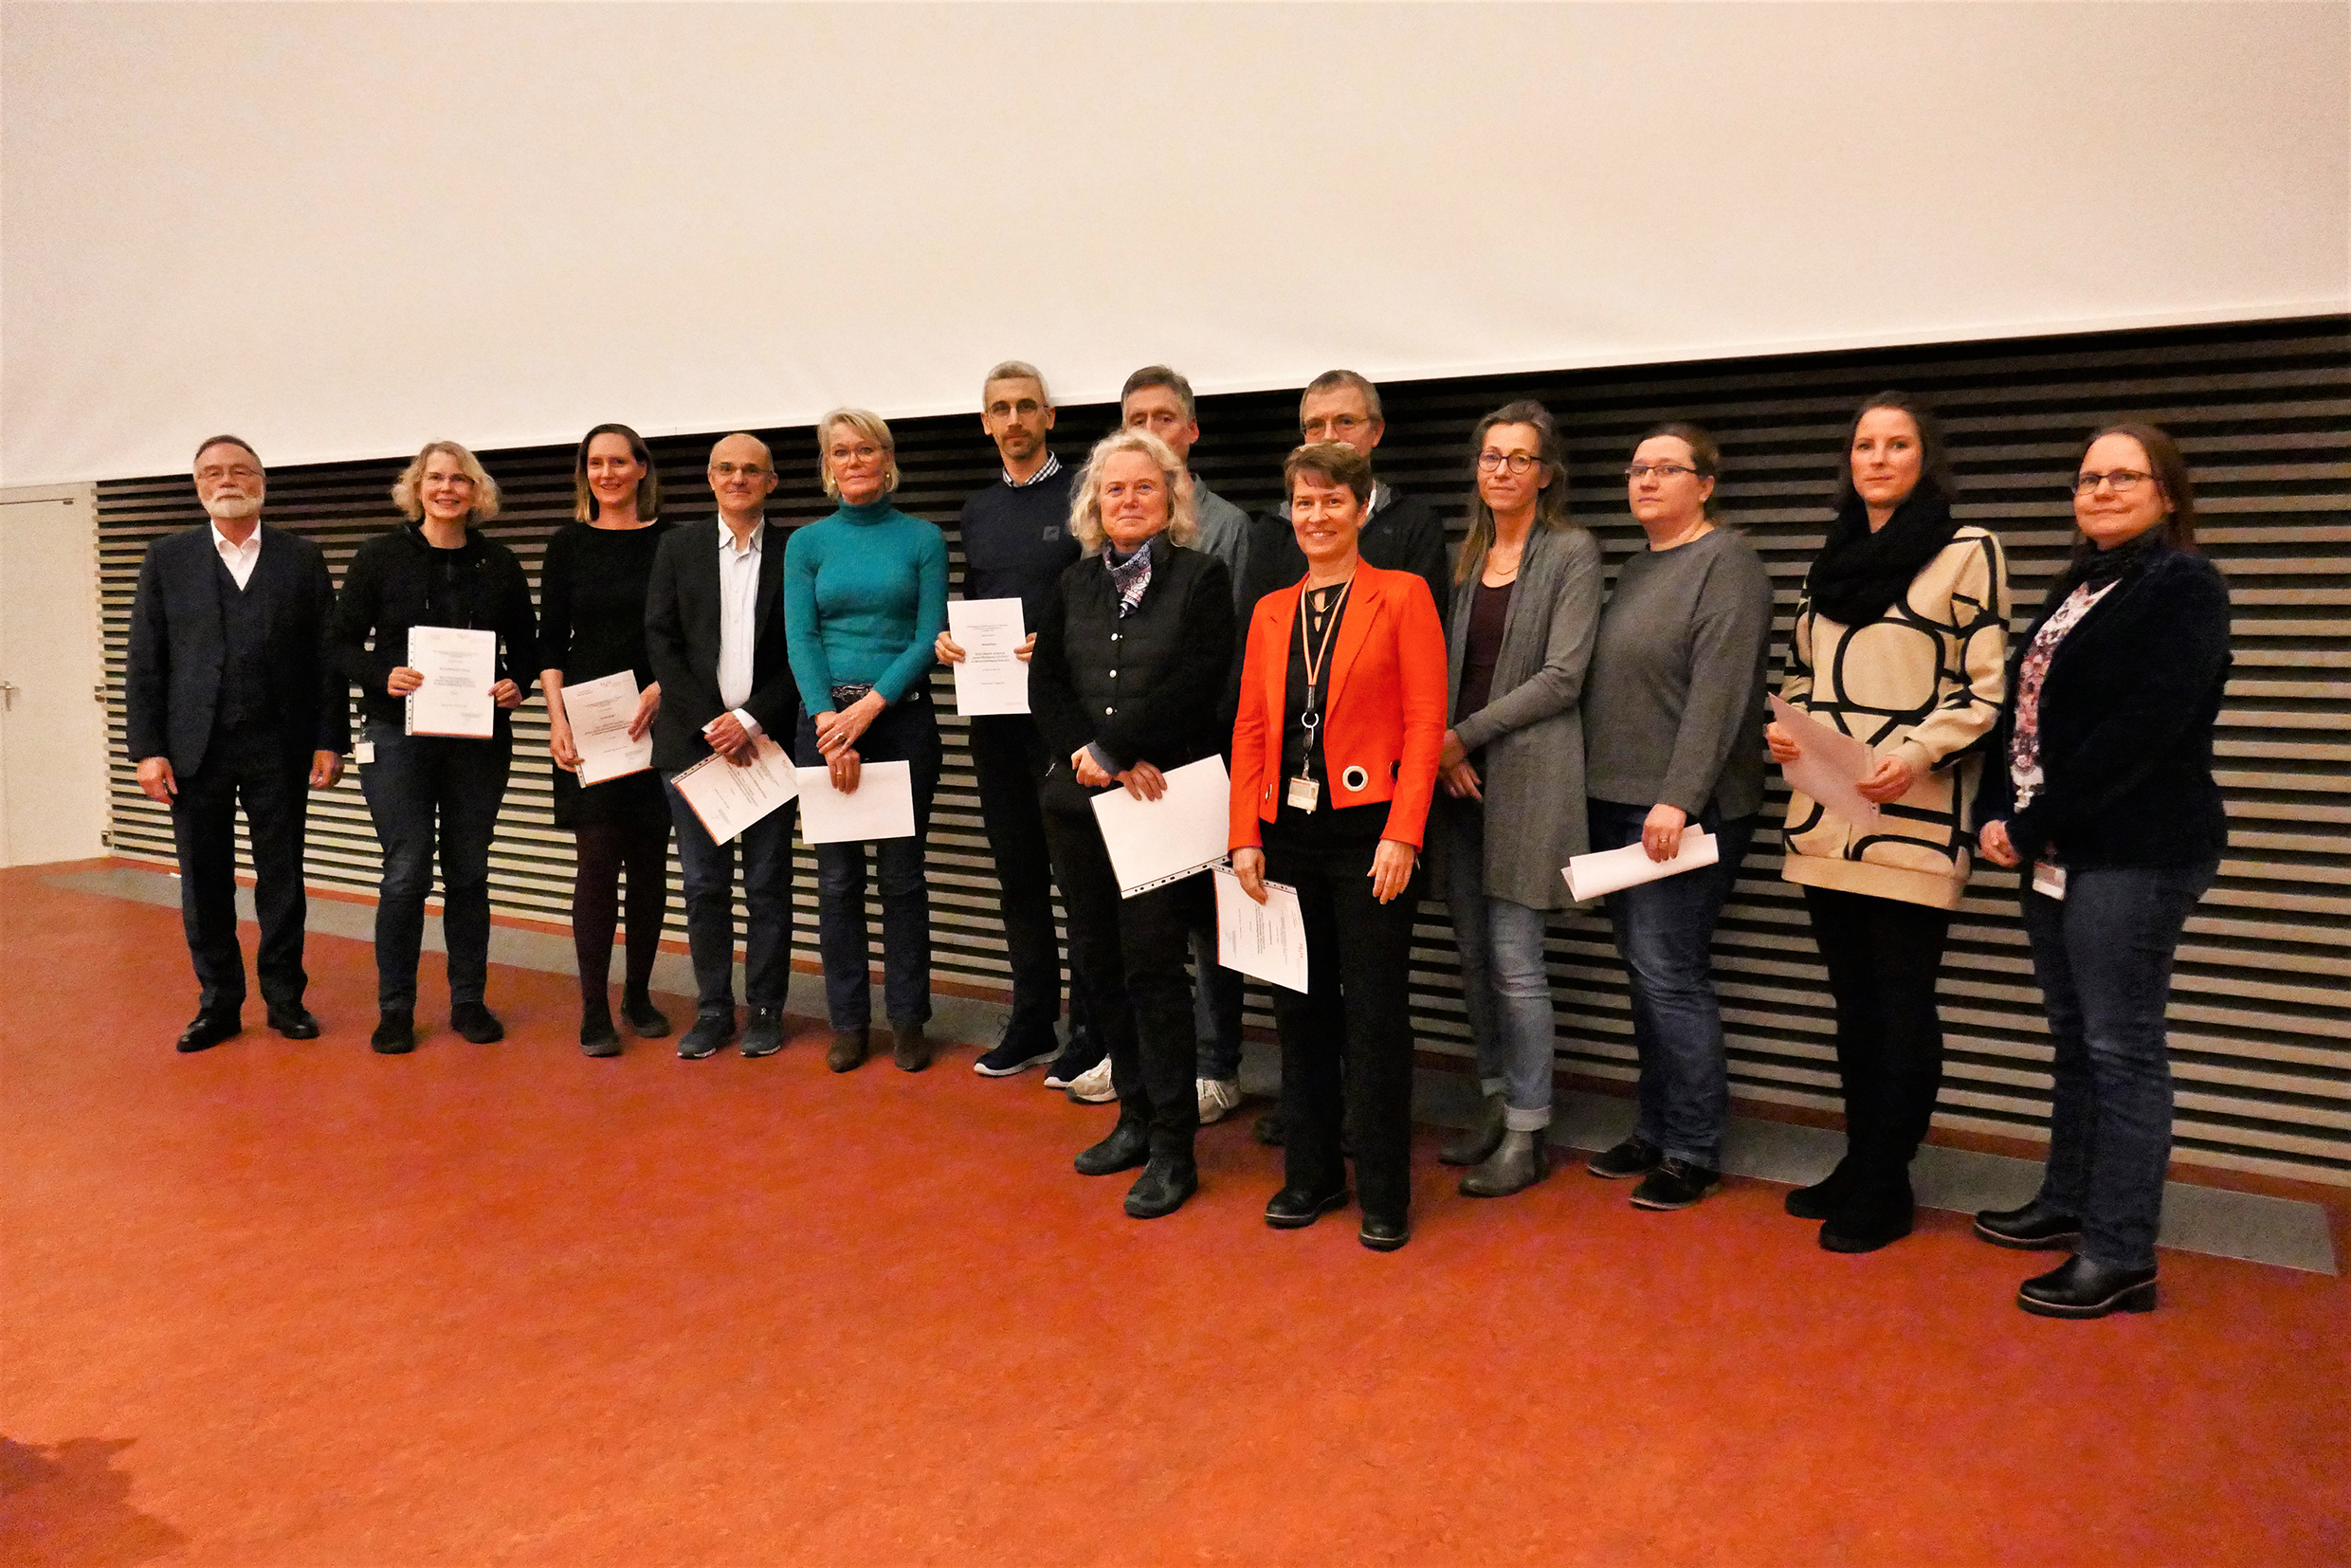 The teaching award winners of the biosciences Master's programmes stand next to each other in an MHH lecture theatre.